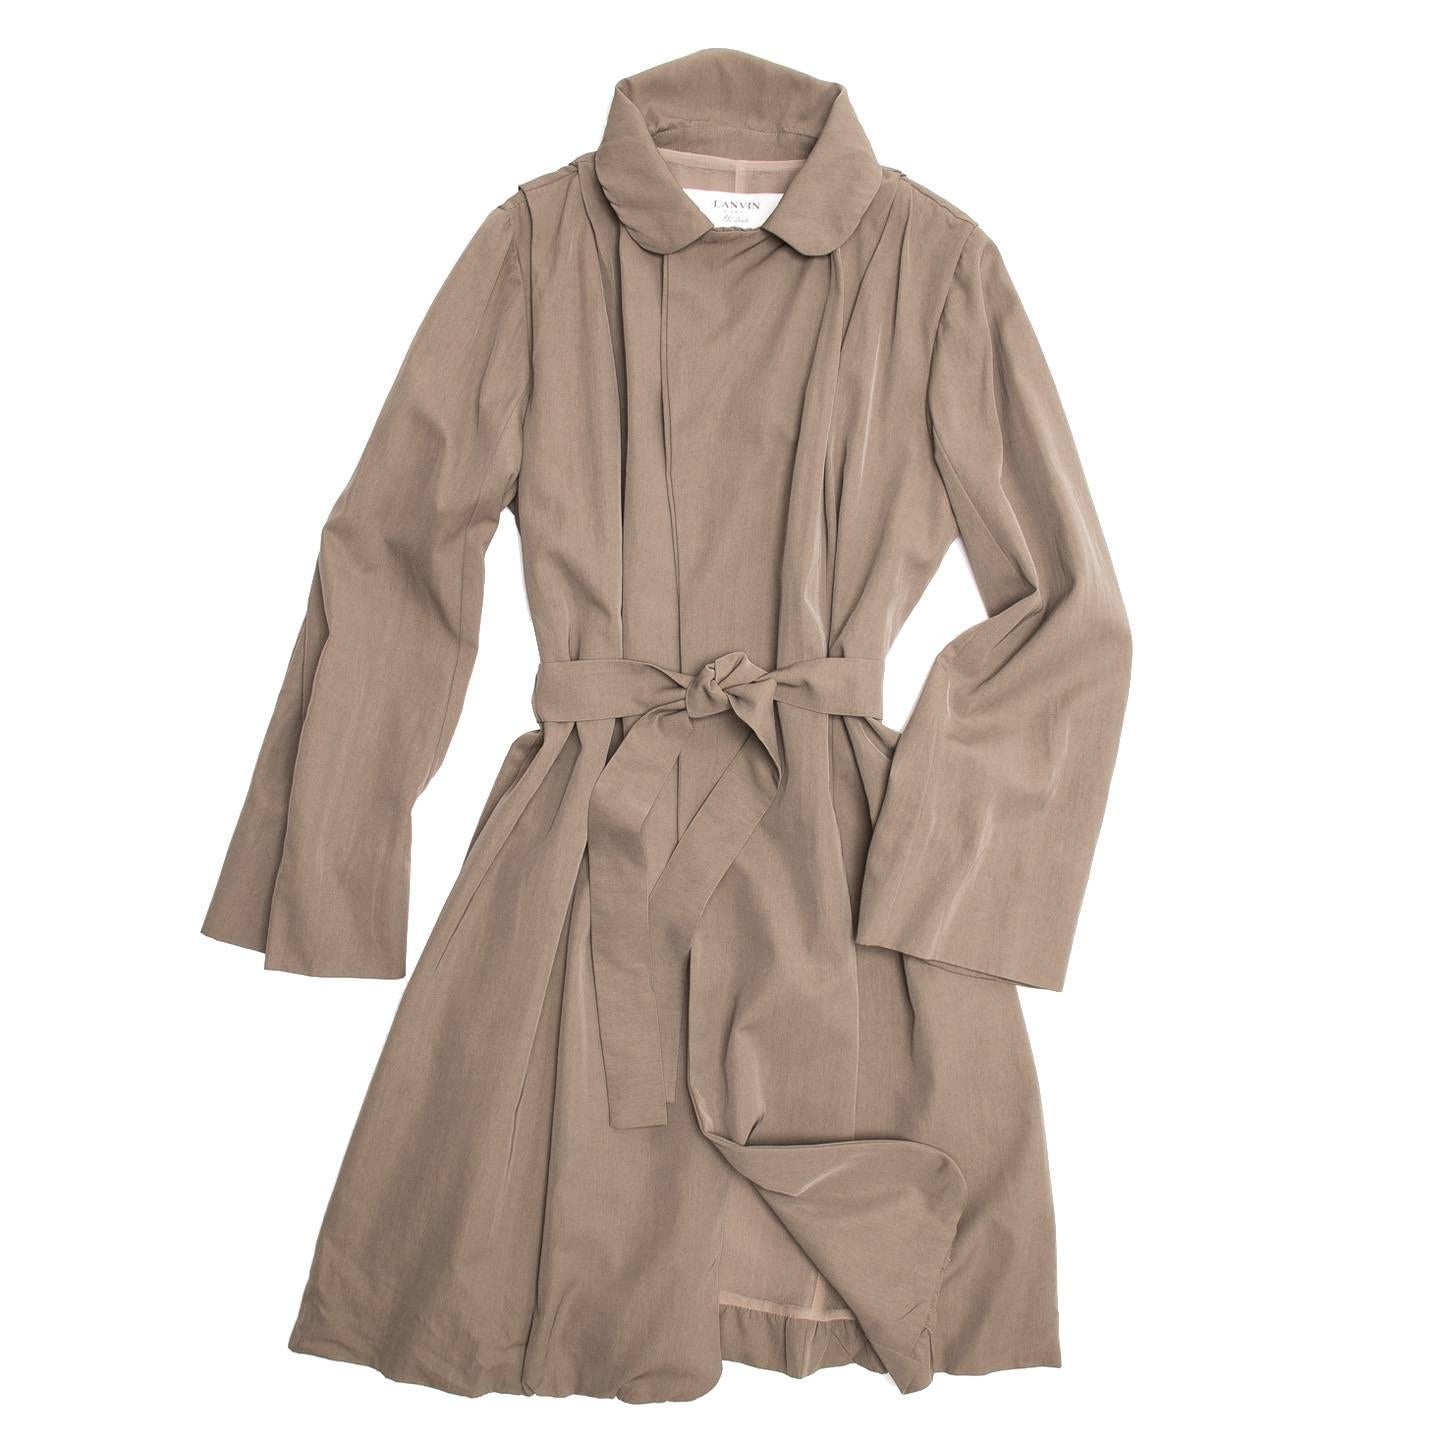 Lanvin 2007. Taupe cotton/viscose blend trench coat with round notched collar. Small pleats on the shoulders create movement and volume to the body and a sash-tie fastens at waist.

Size  40 French sizing

Condition  Excellent: never worn